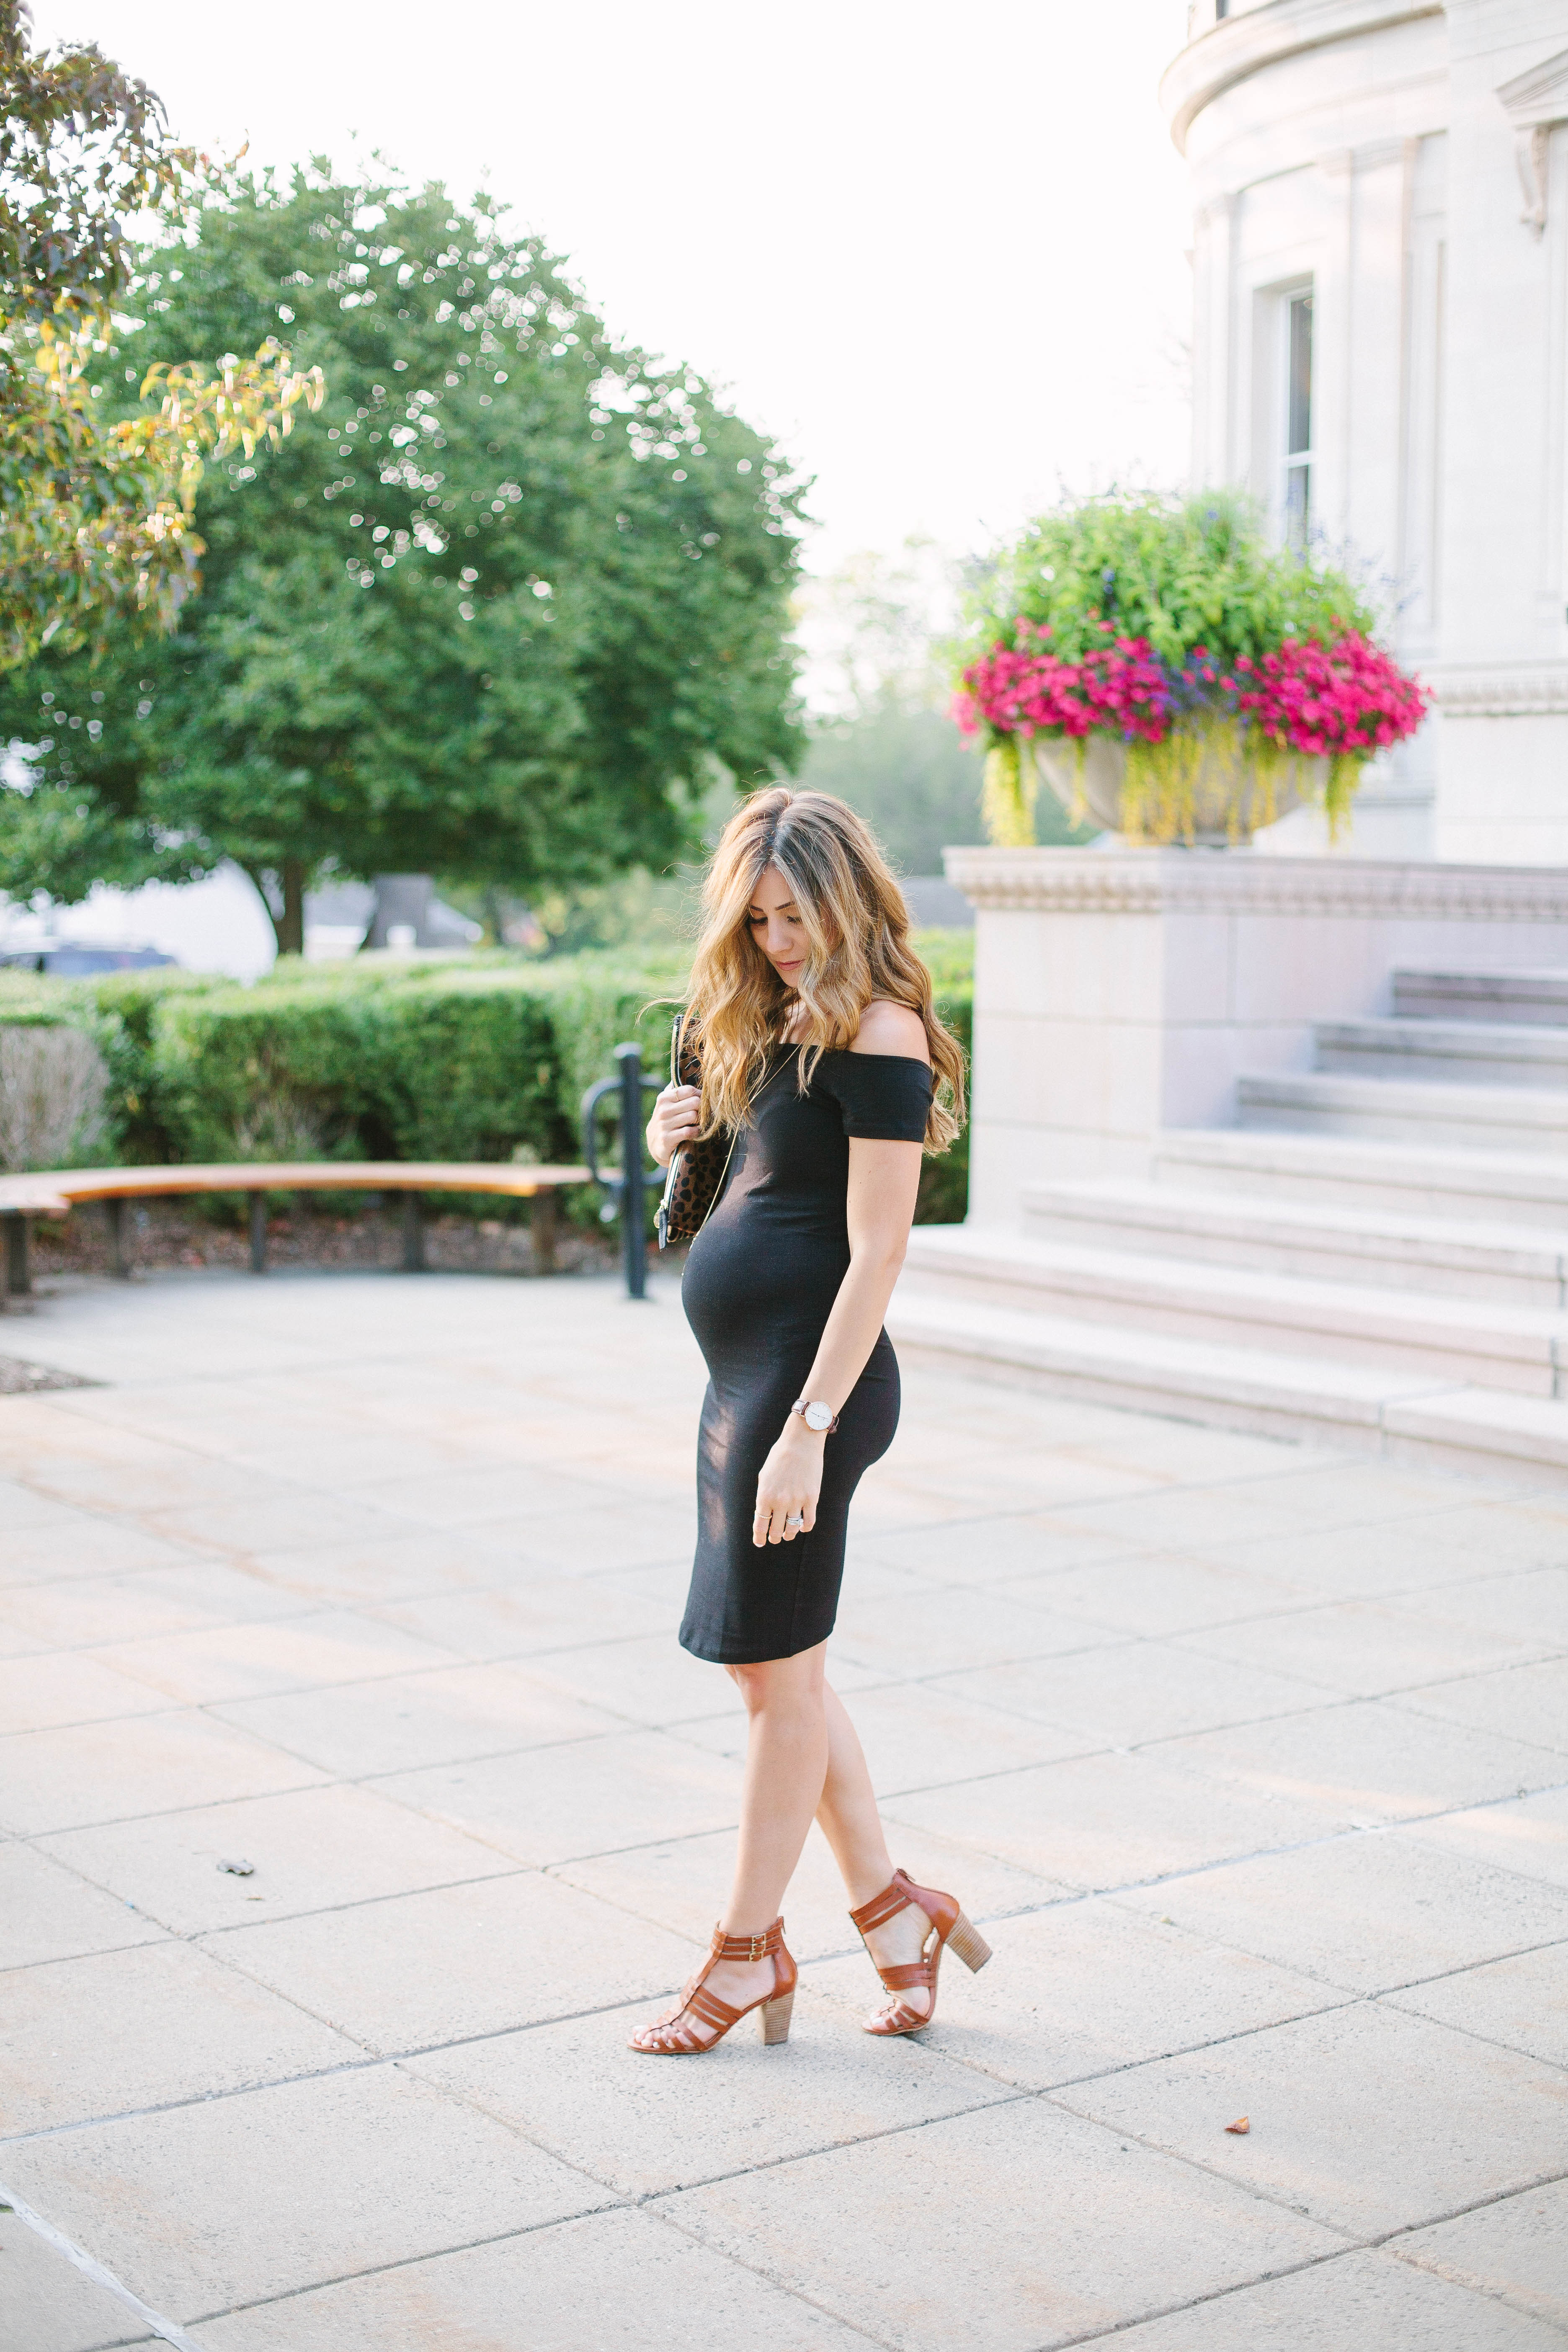 Looking for the perfect LBD? Check out this roundup of maternity black dresses that are versatile enough to be worn casually or dressed up for events!